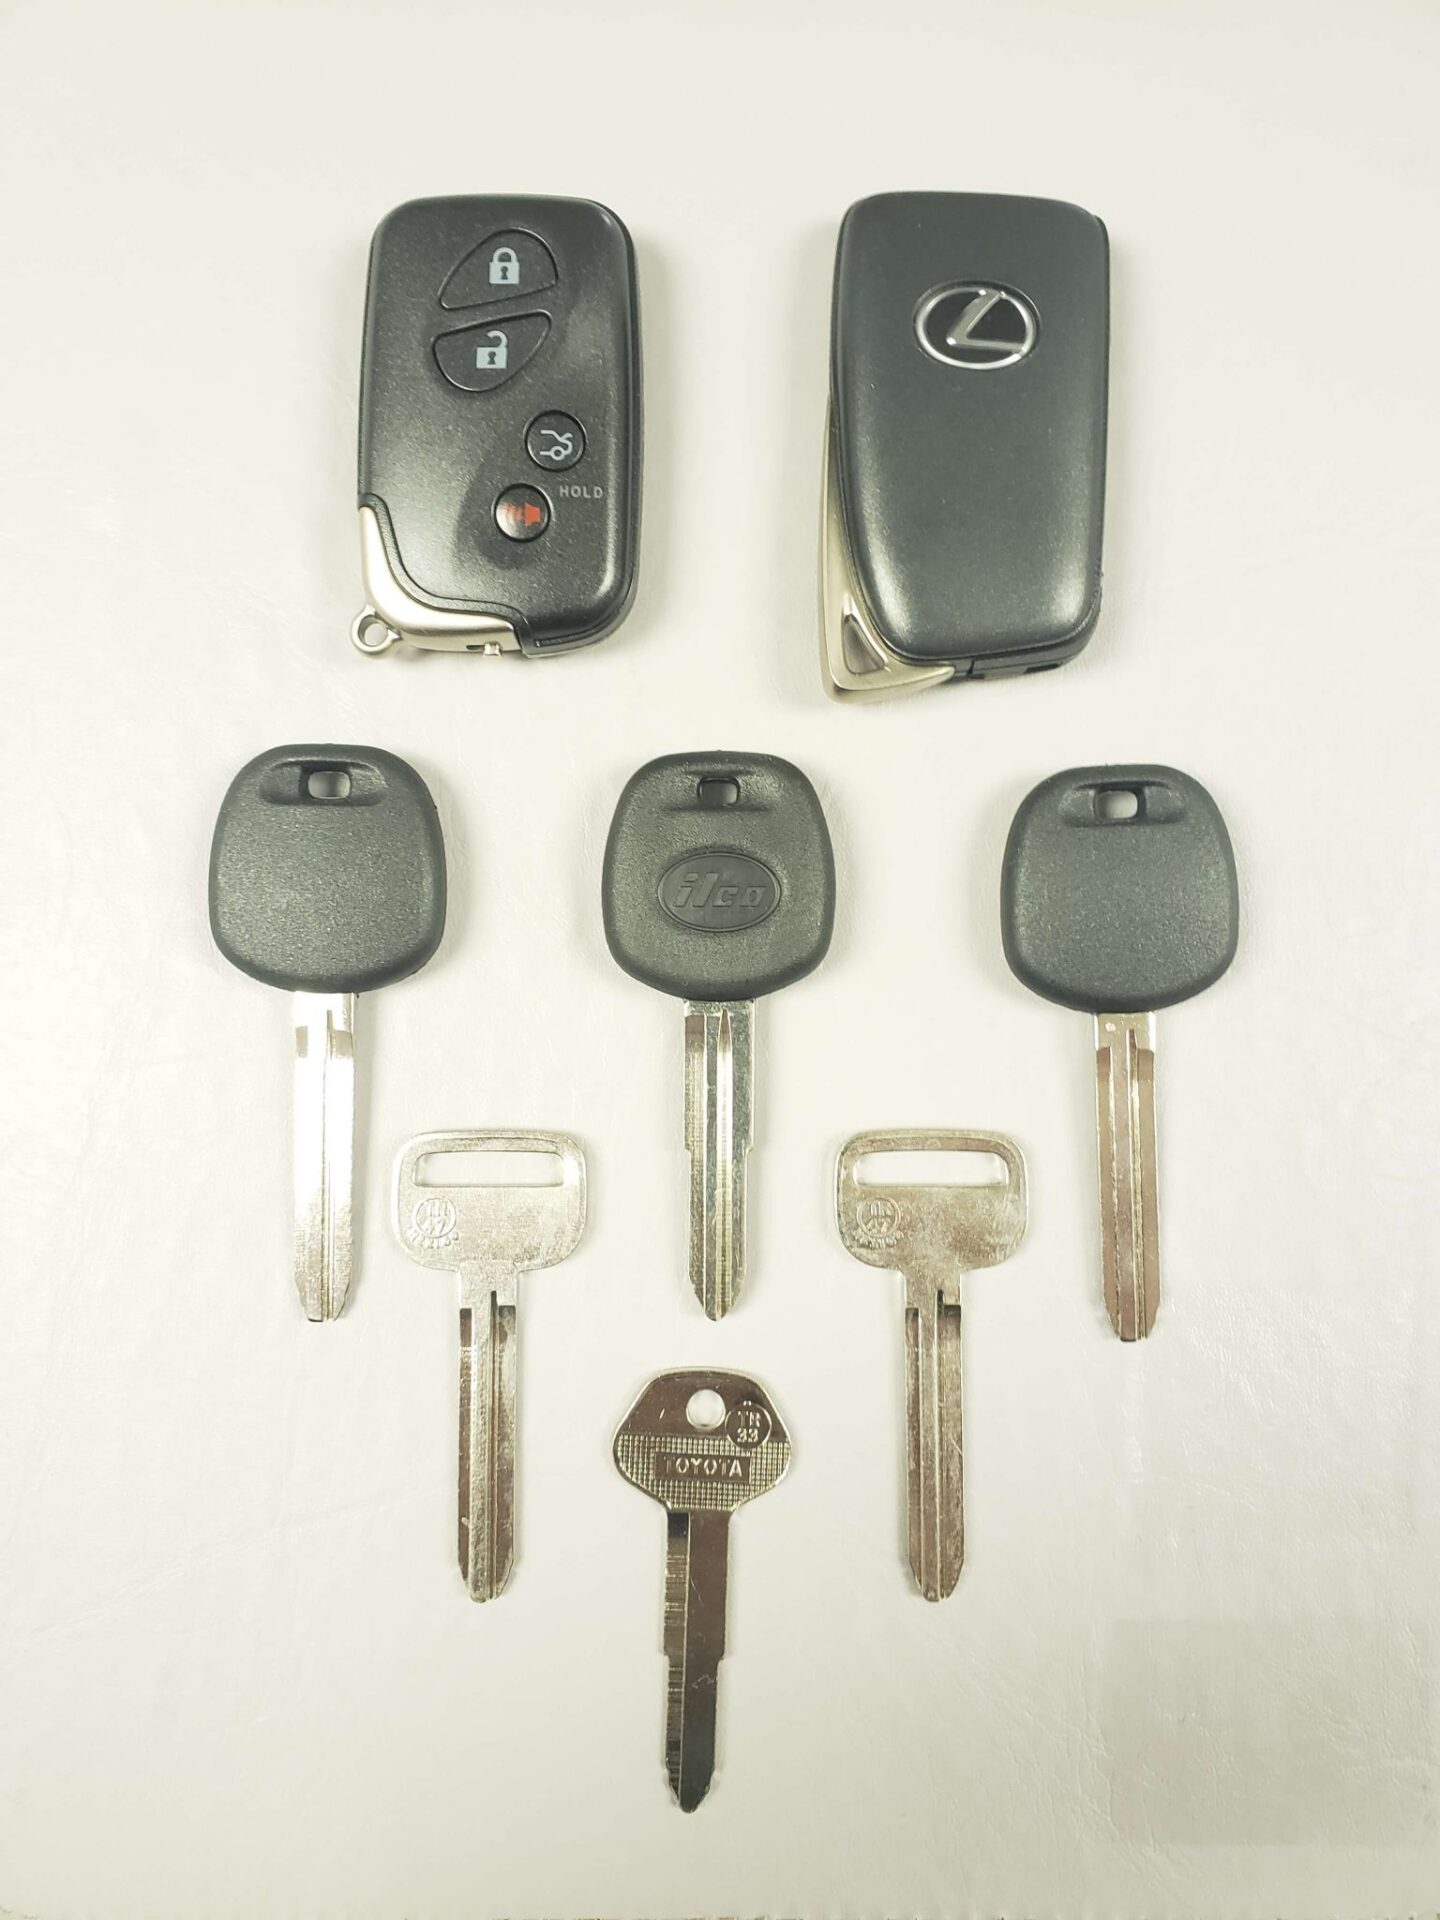 How To Change Battery In Lexus Gx460 Key Fob